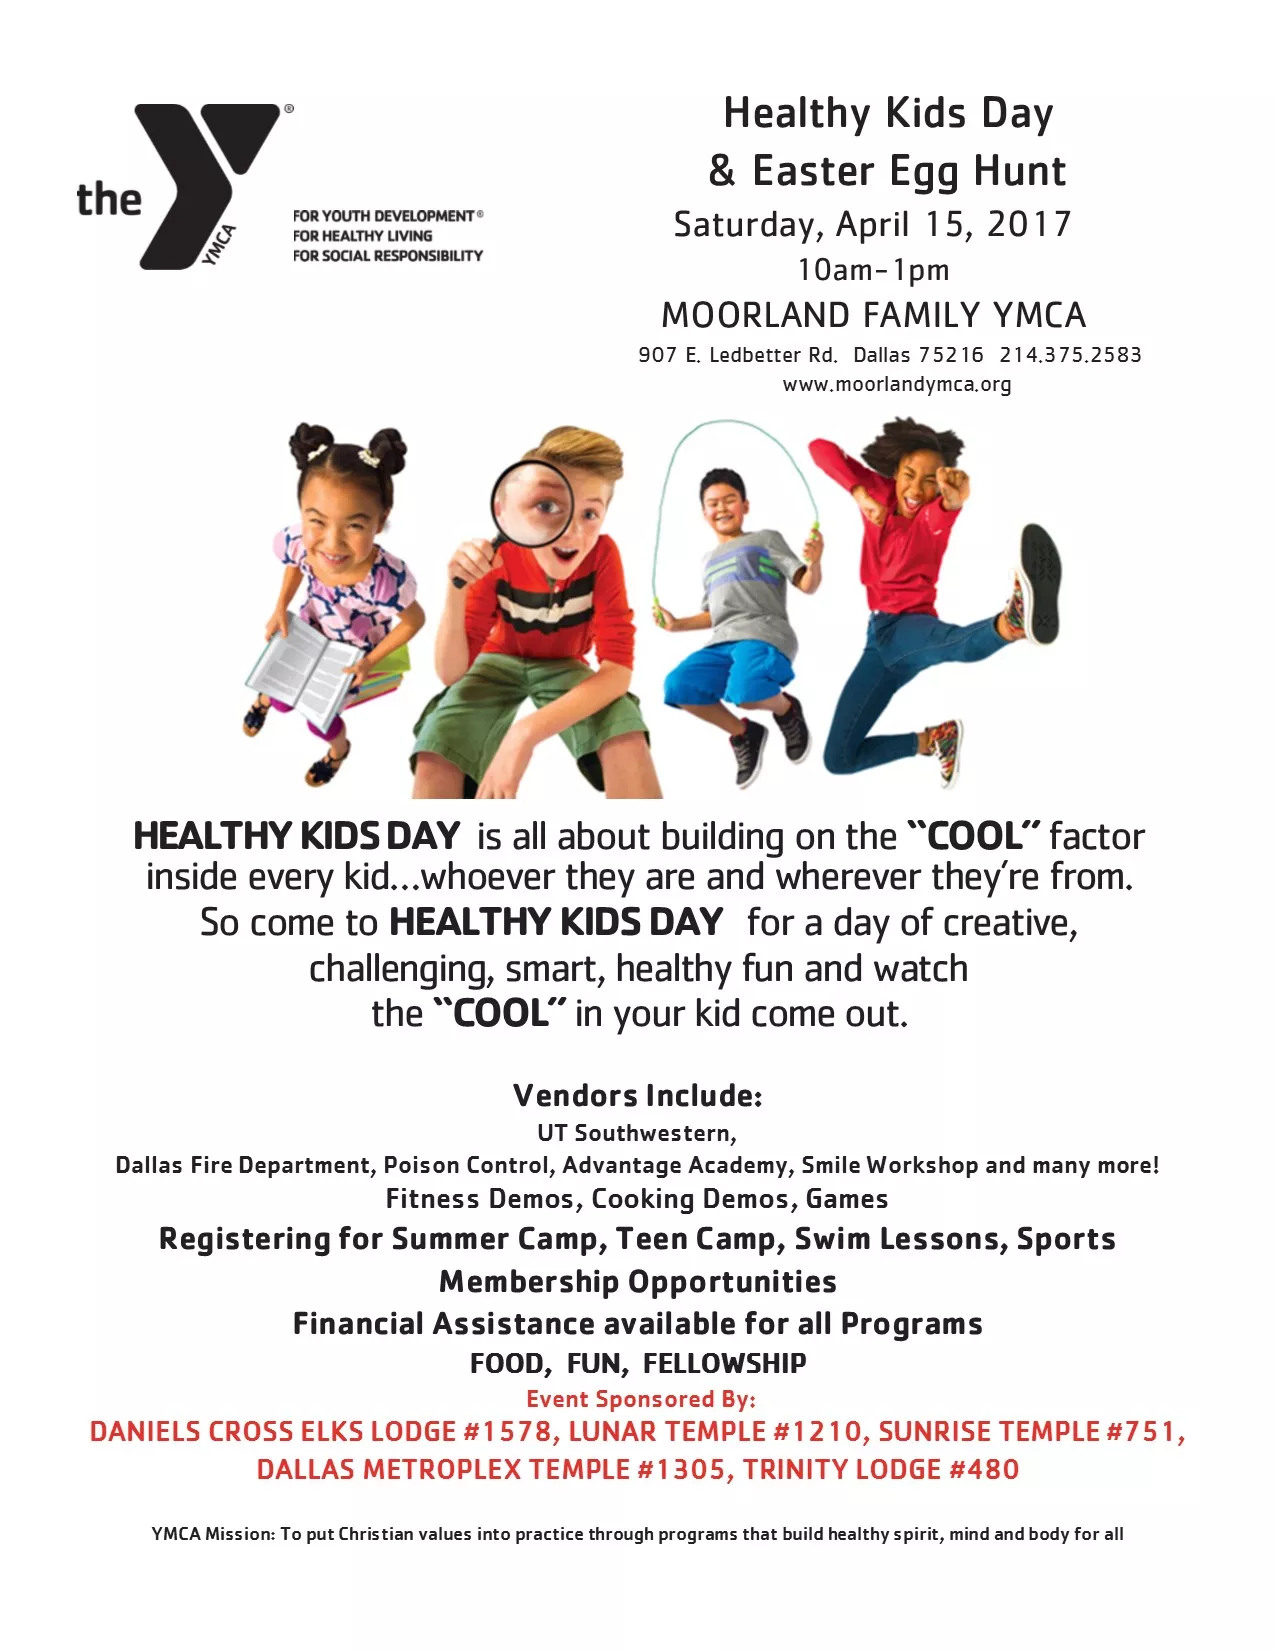 Healthy Kids Day Flyer 2017